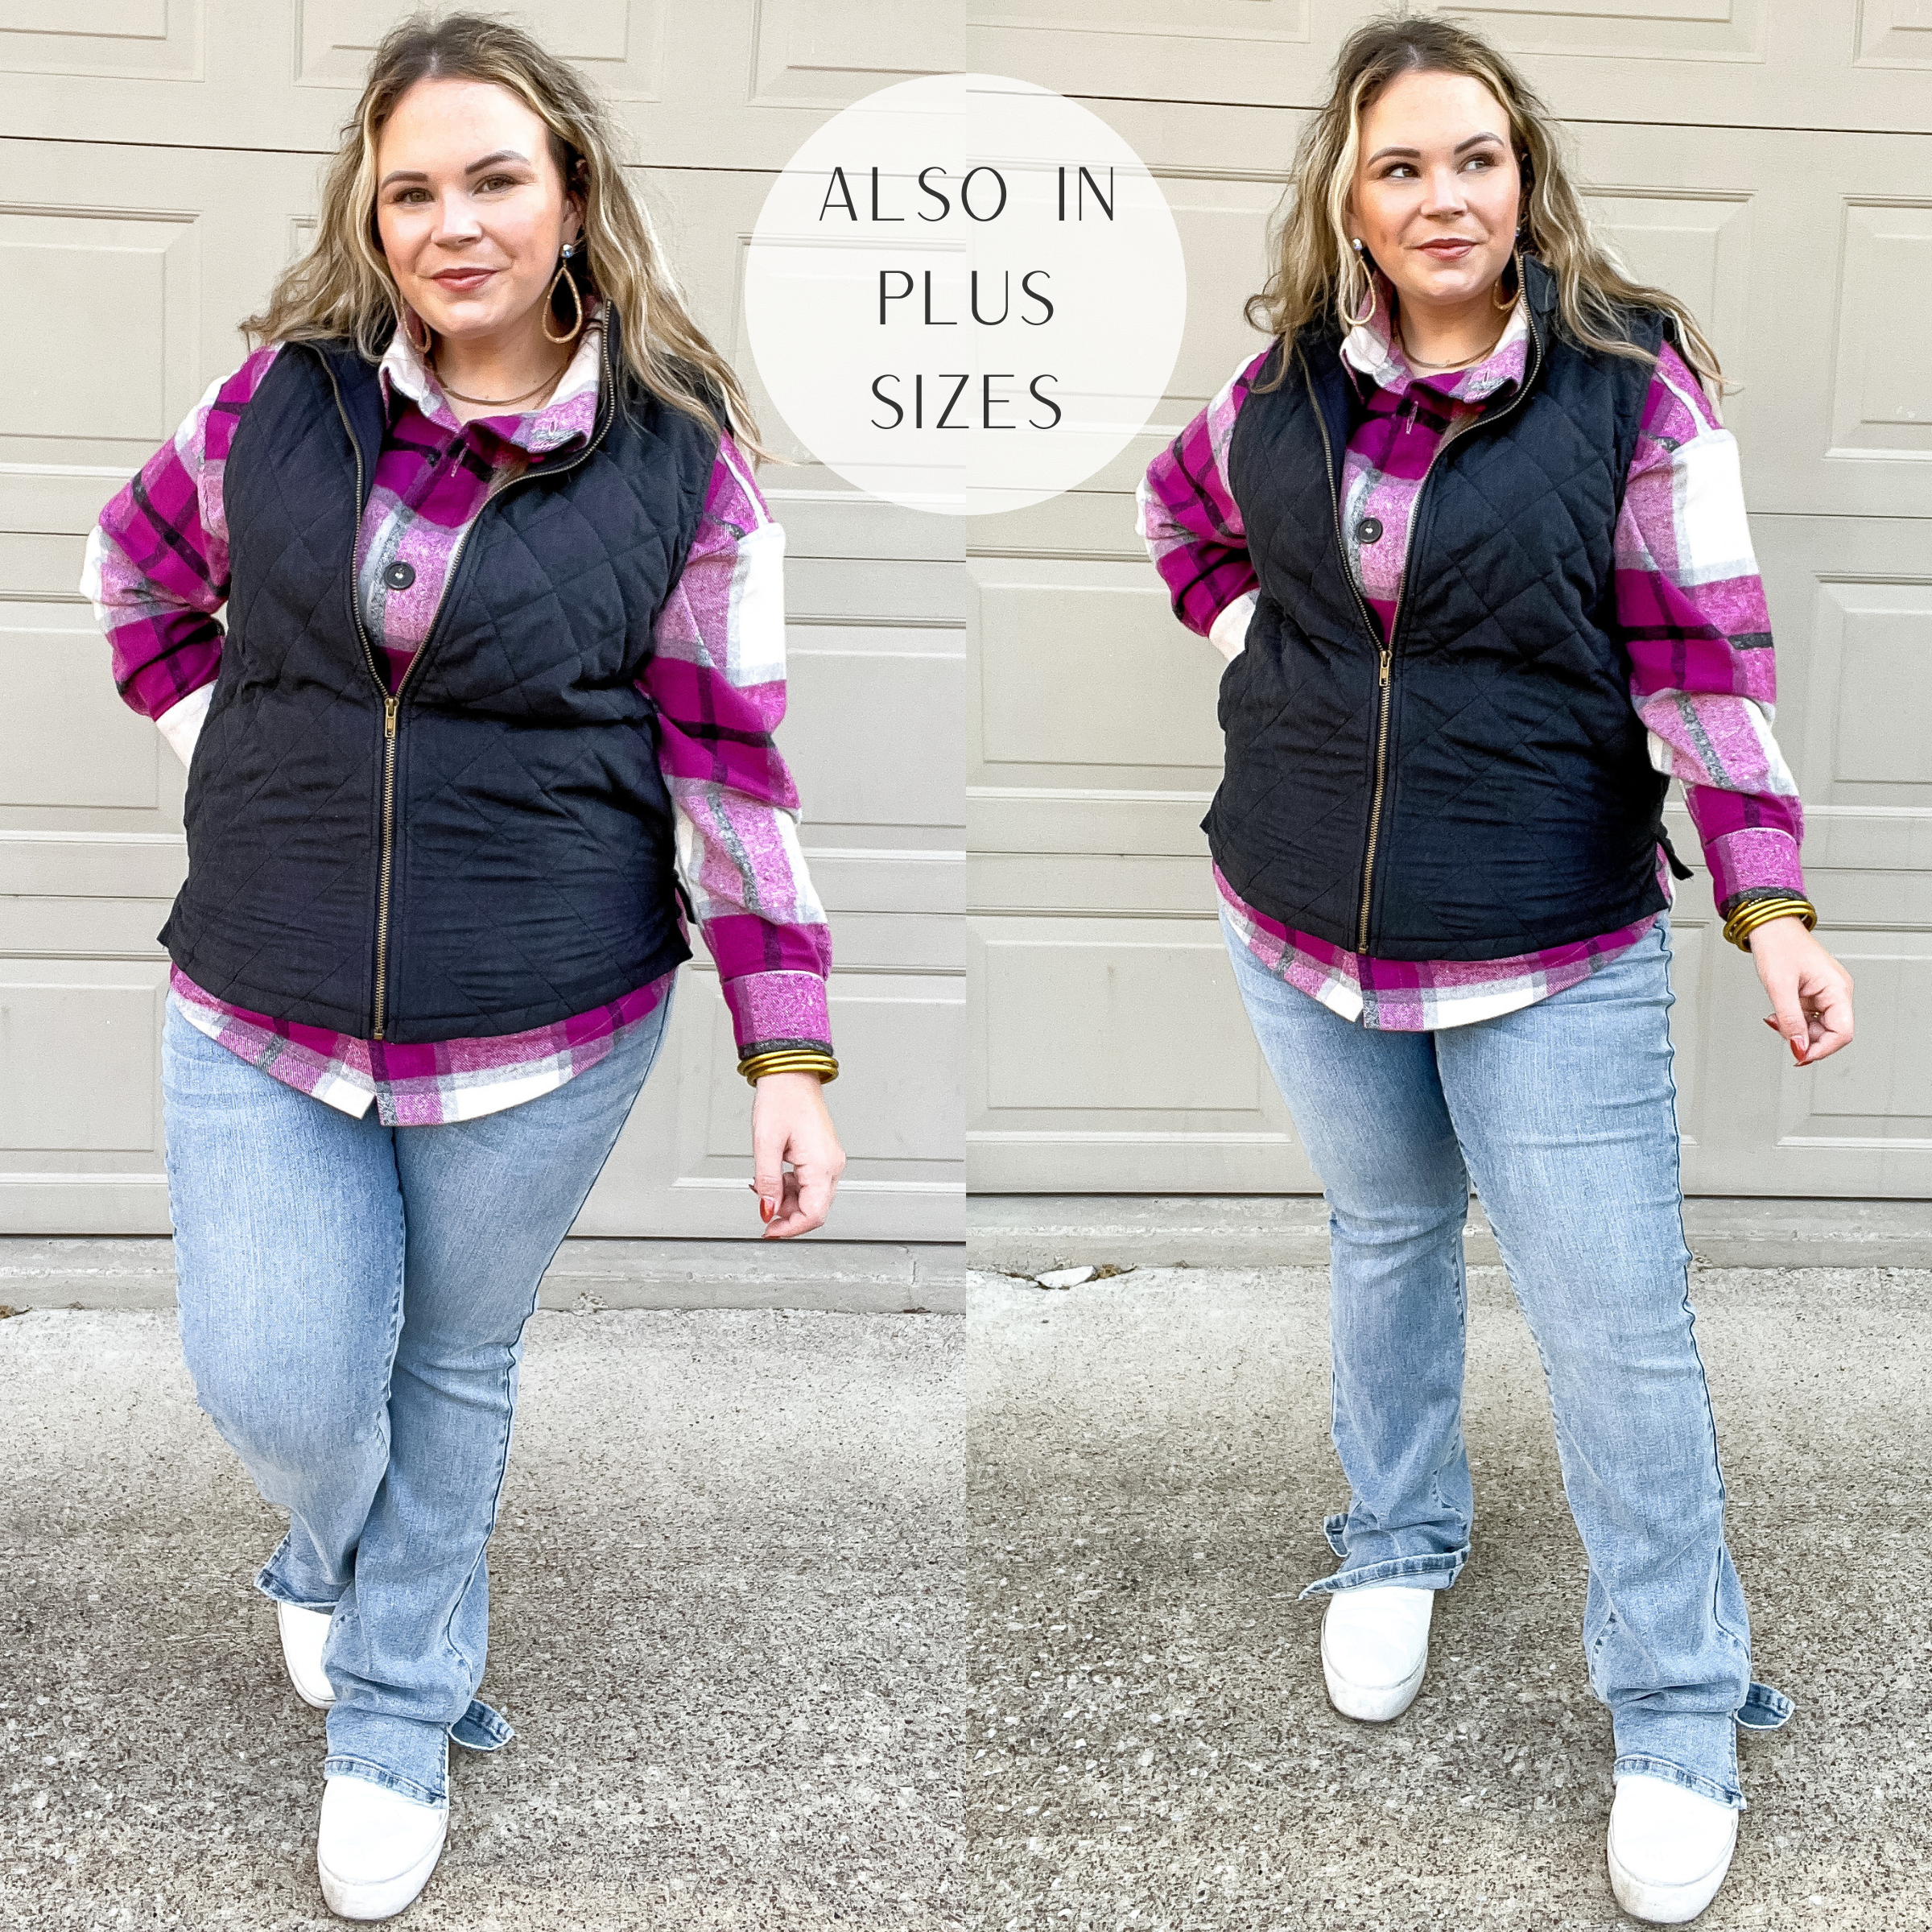 Model is wearing a black quilted vest with a zip up front and high neckline. Model has it on over a pink plaid top, bootcut jeans, white sneakers, and gold jewelry.